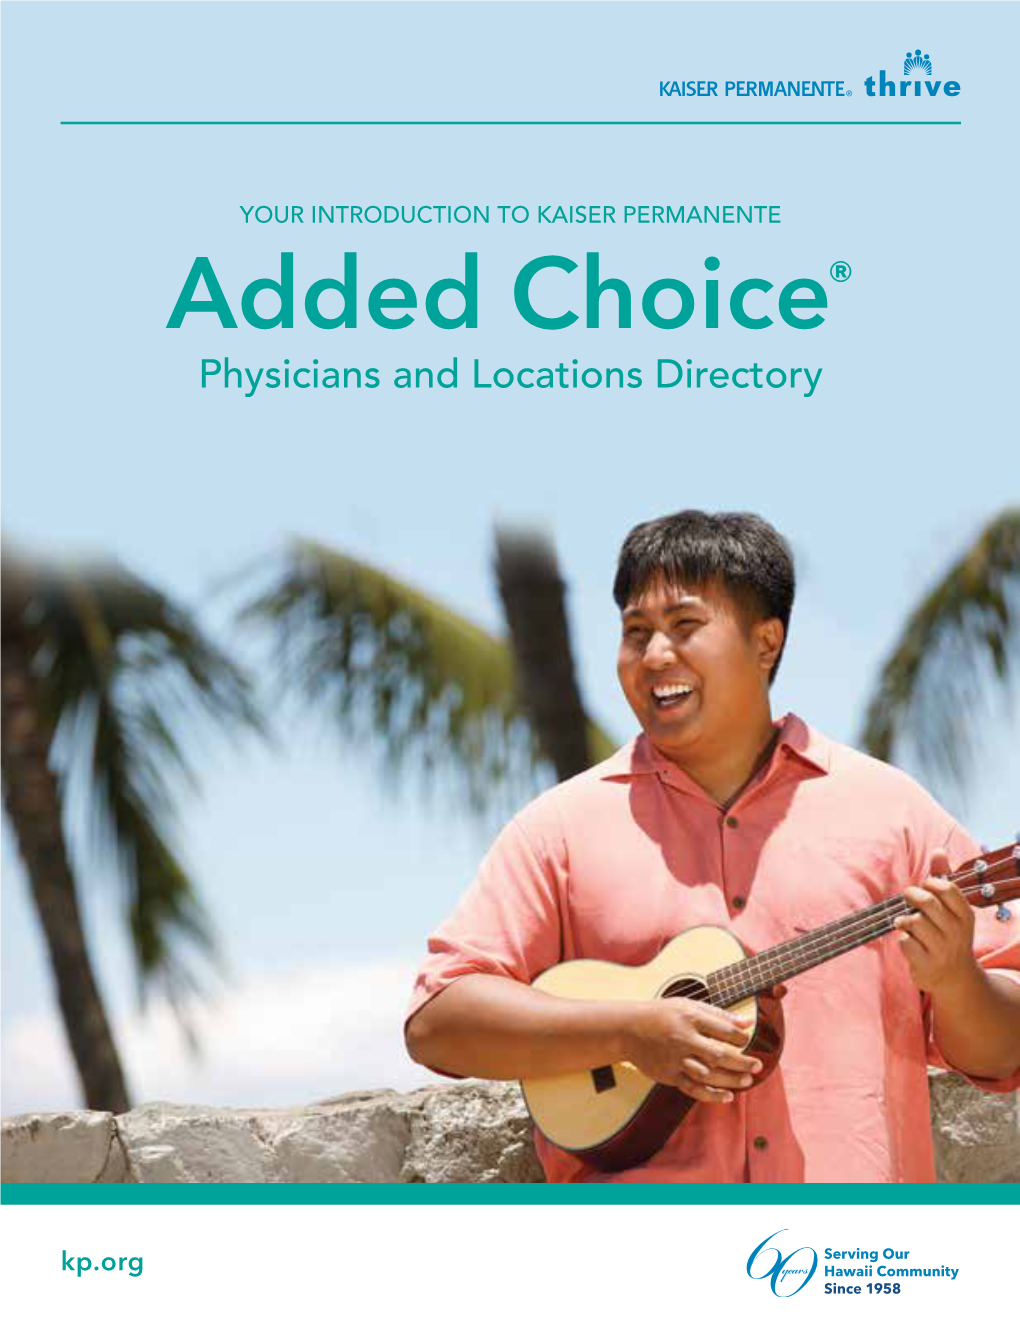 Added Choice Physicians and Locations Directory